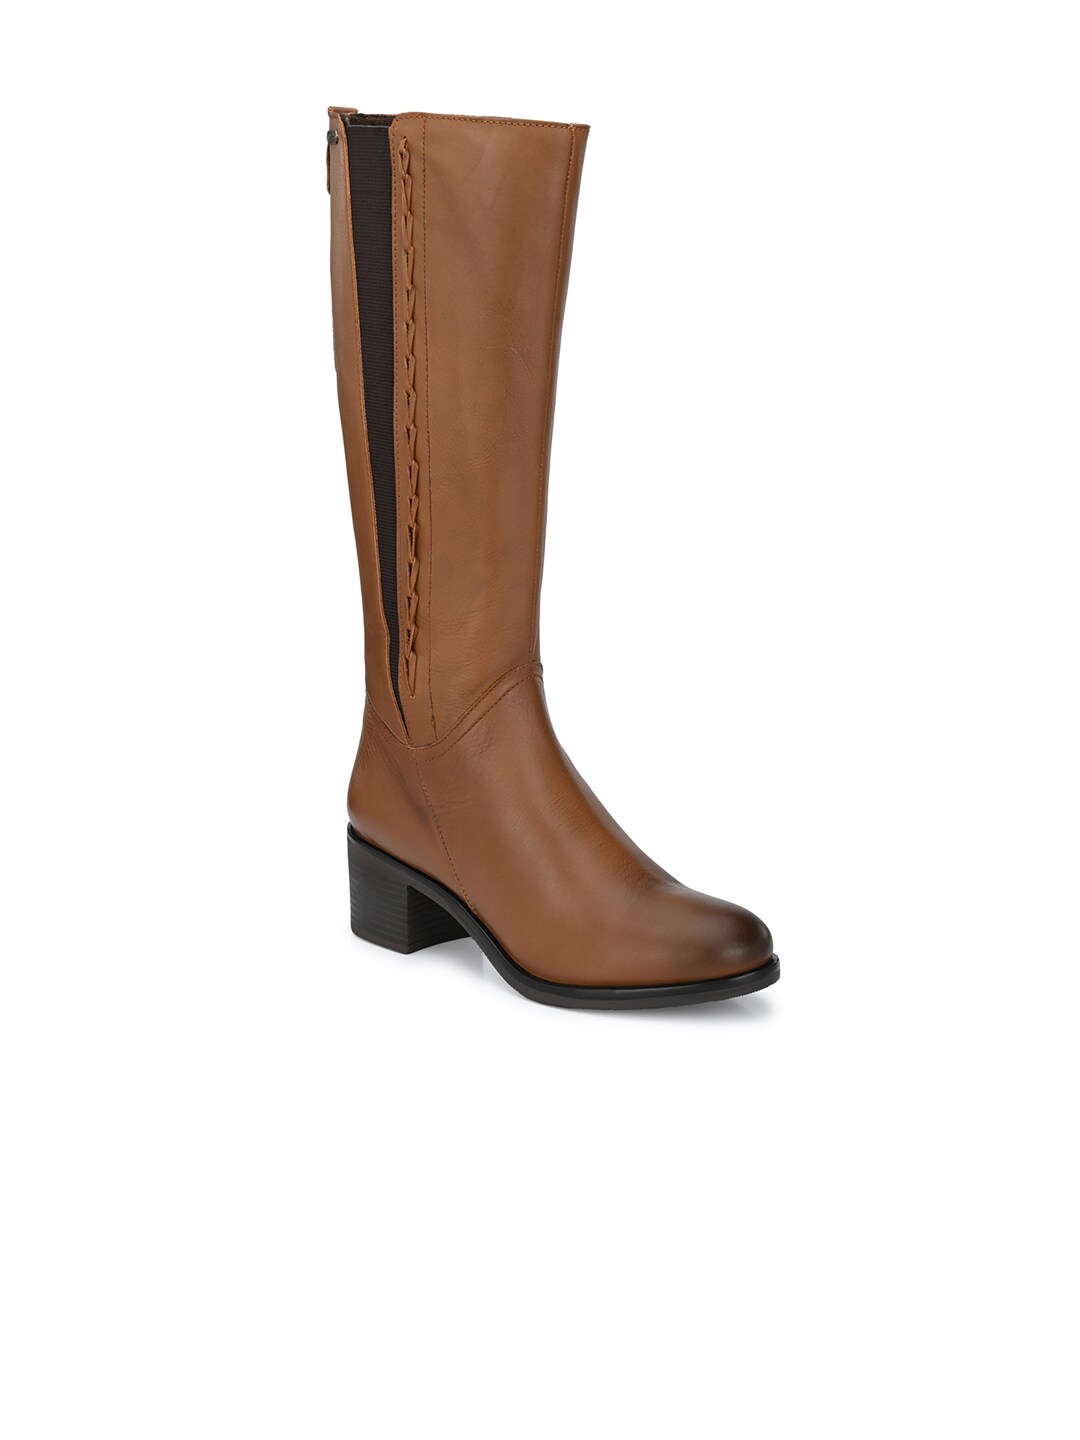 Delize Tan Leather Block Heeled Boots Price in India